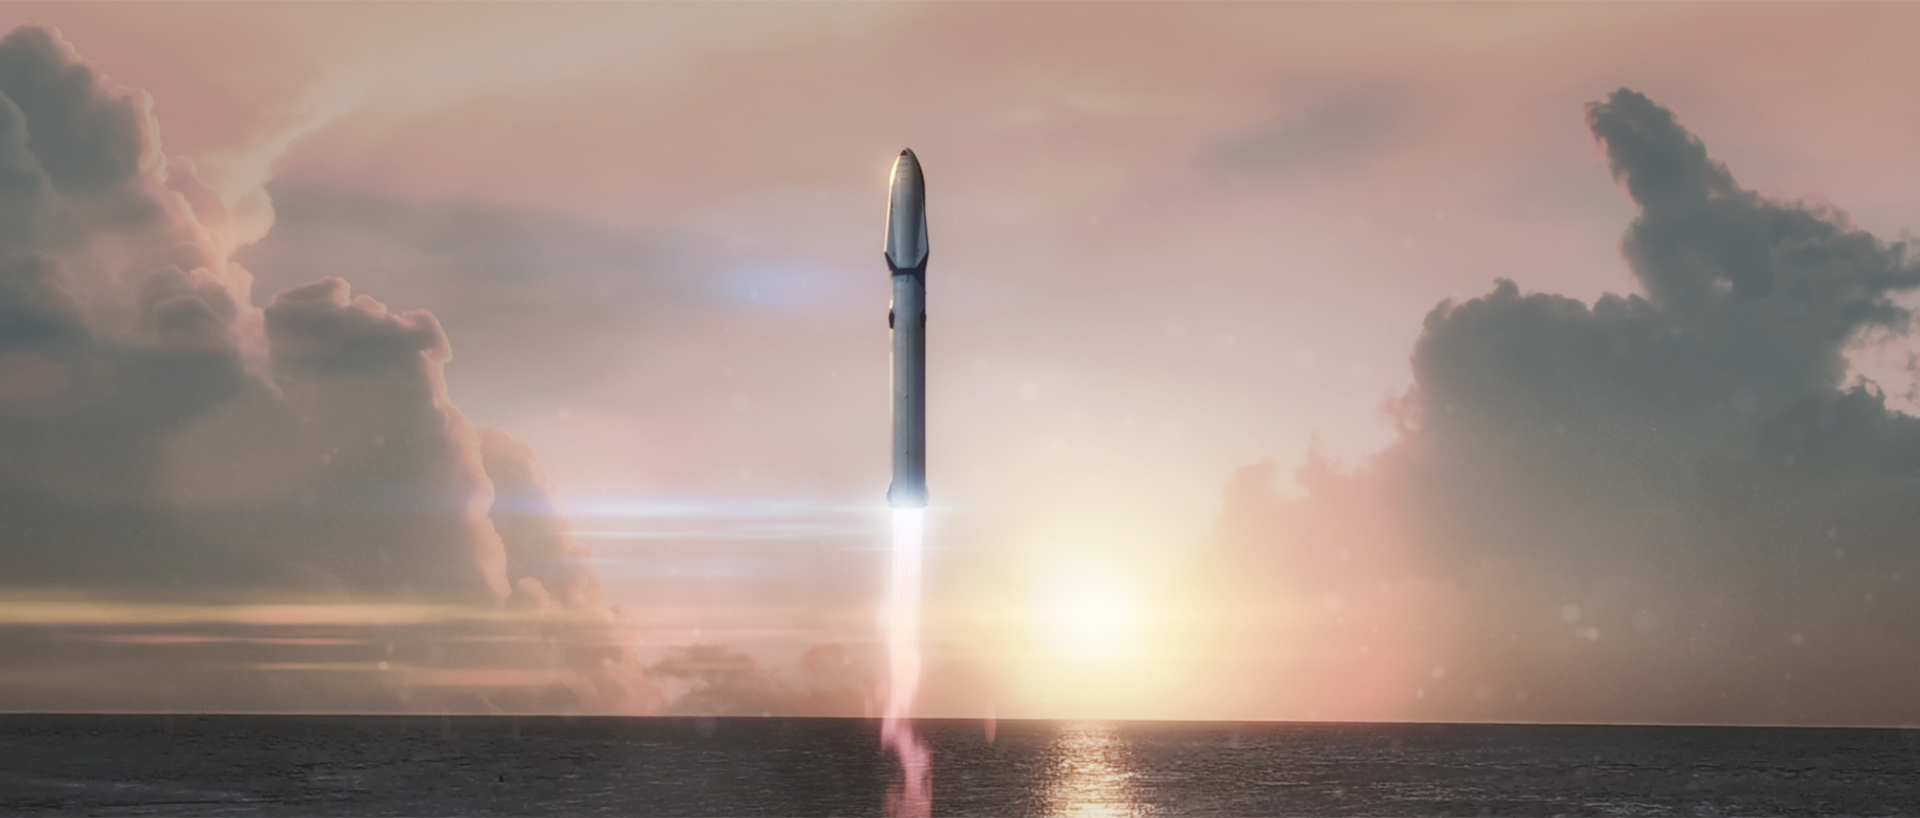 Spacex S Mars Colony Plan By The Numbers Space Images, Photos, Reviews